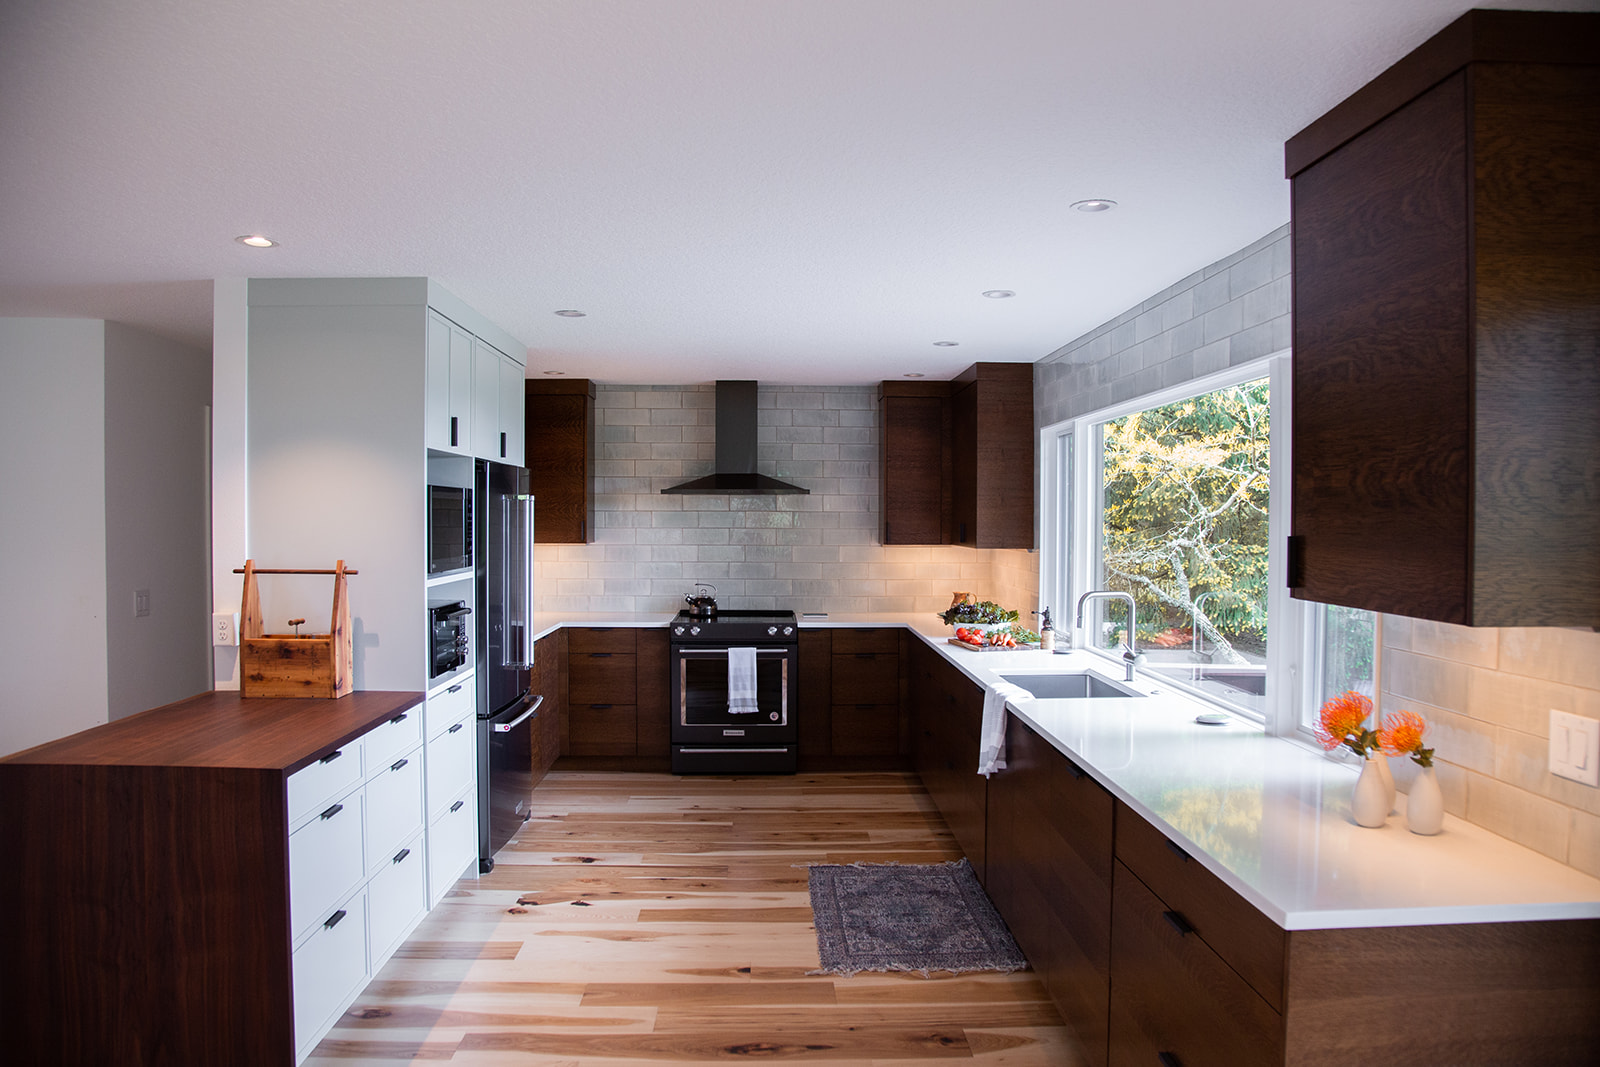 overall view of the kitchen with stained oak cabinets and handmade tile backsplash